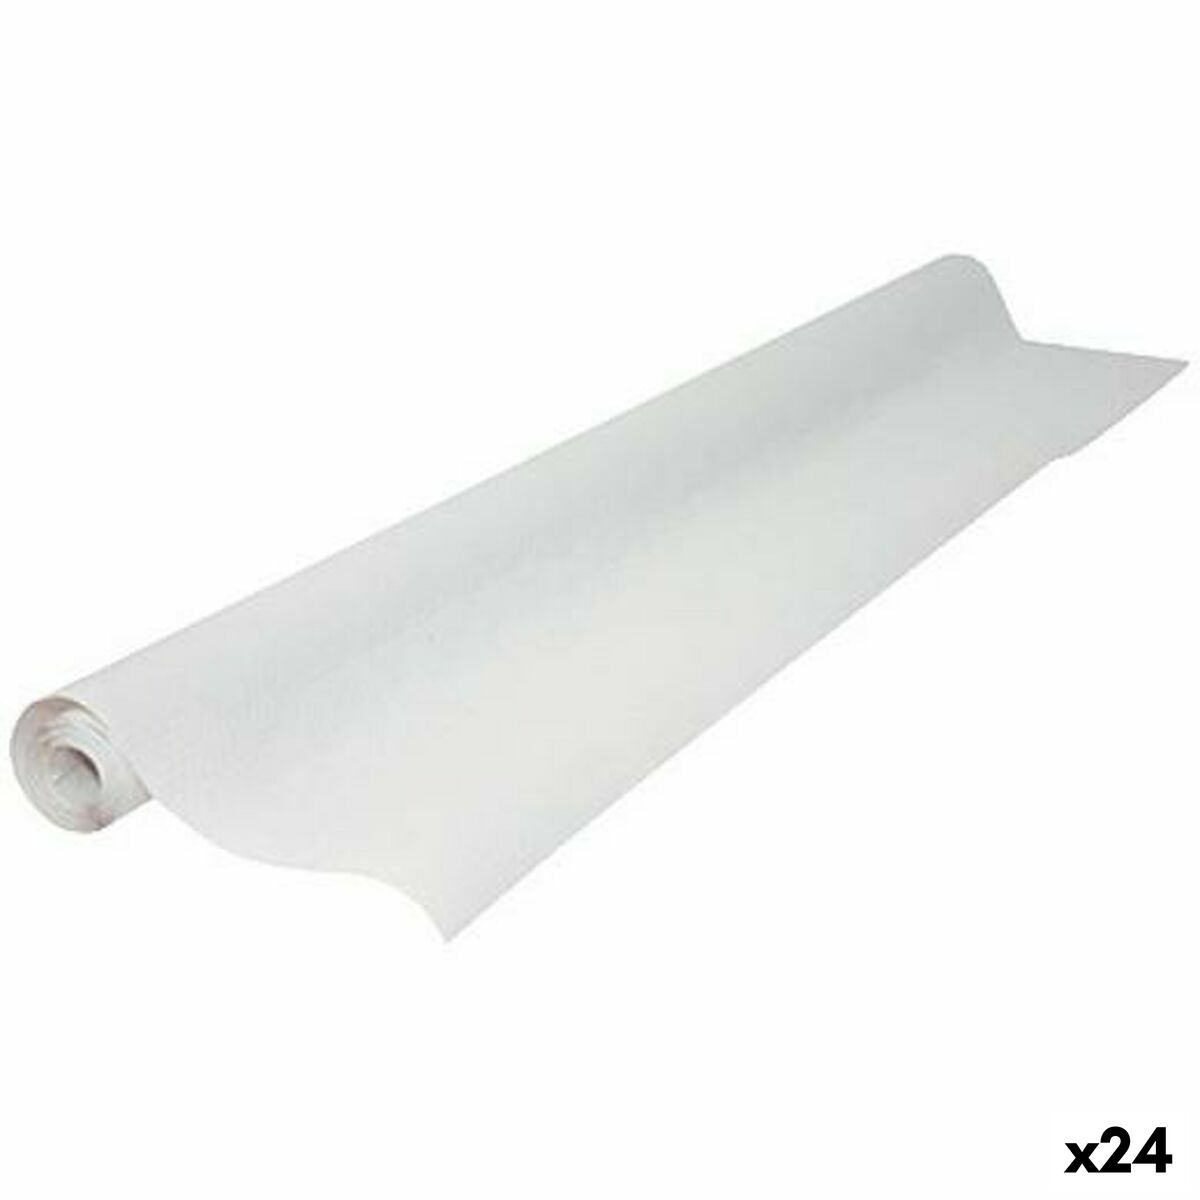 Tablecloth Maxi Products 1 x 10 m Paper White 24 Units 40 Units